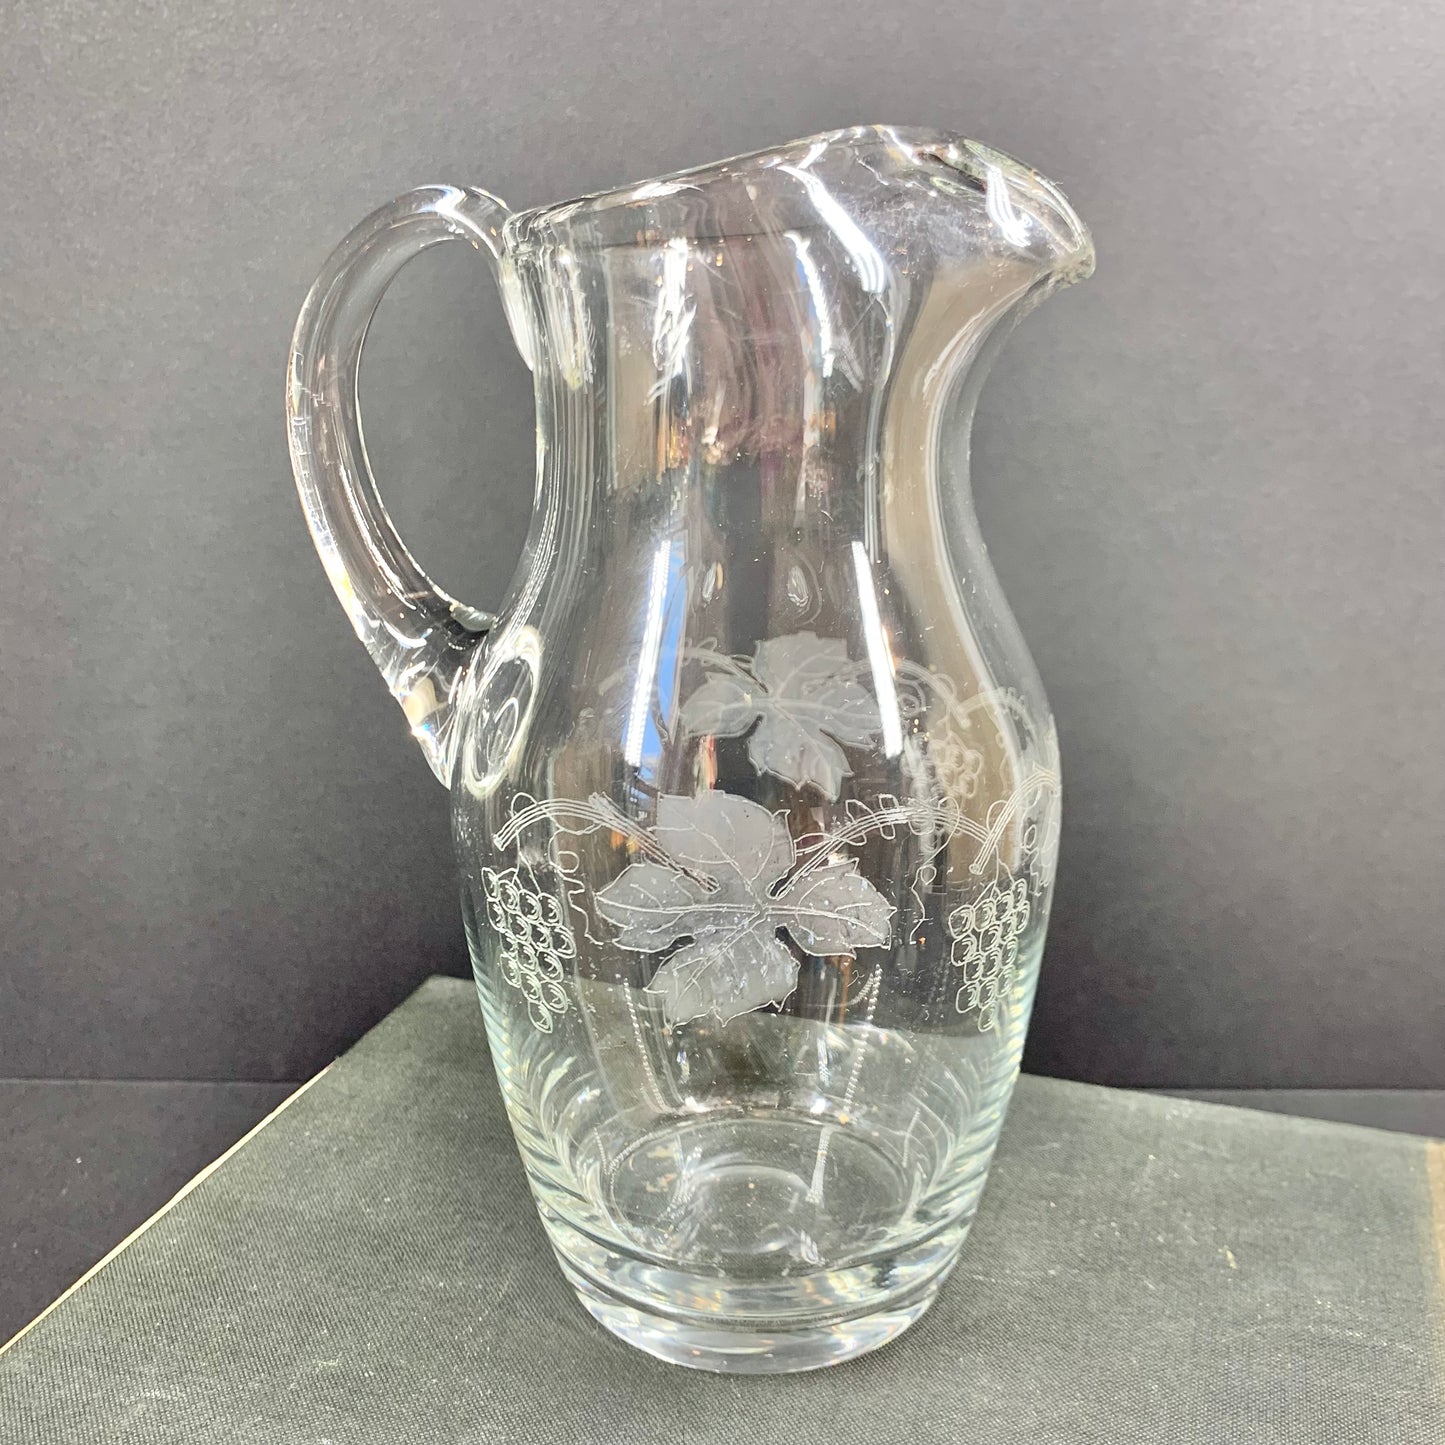 Rare 1940s hand etched glass jug and matching mugs